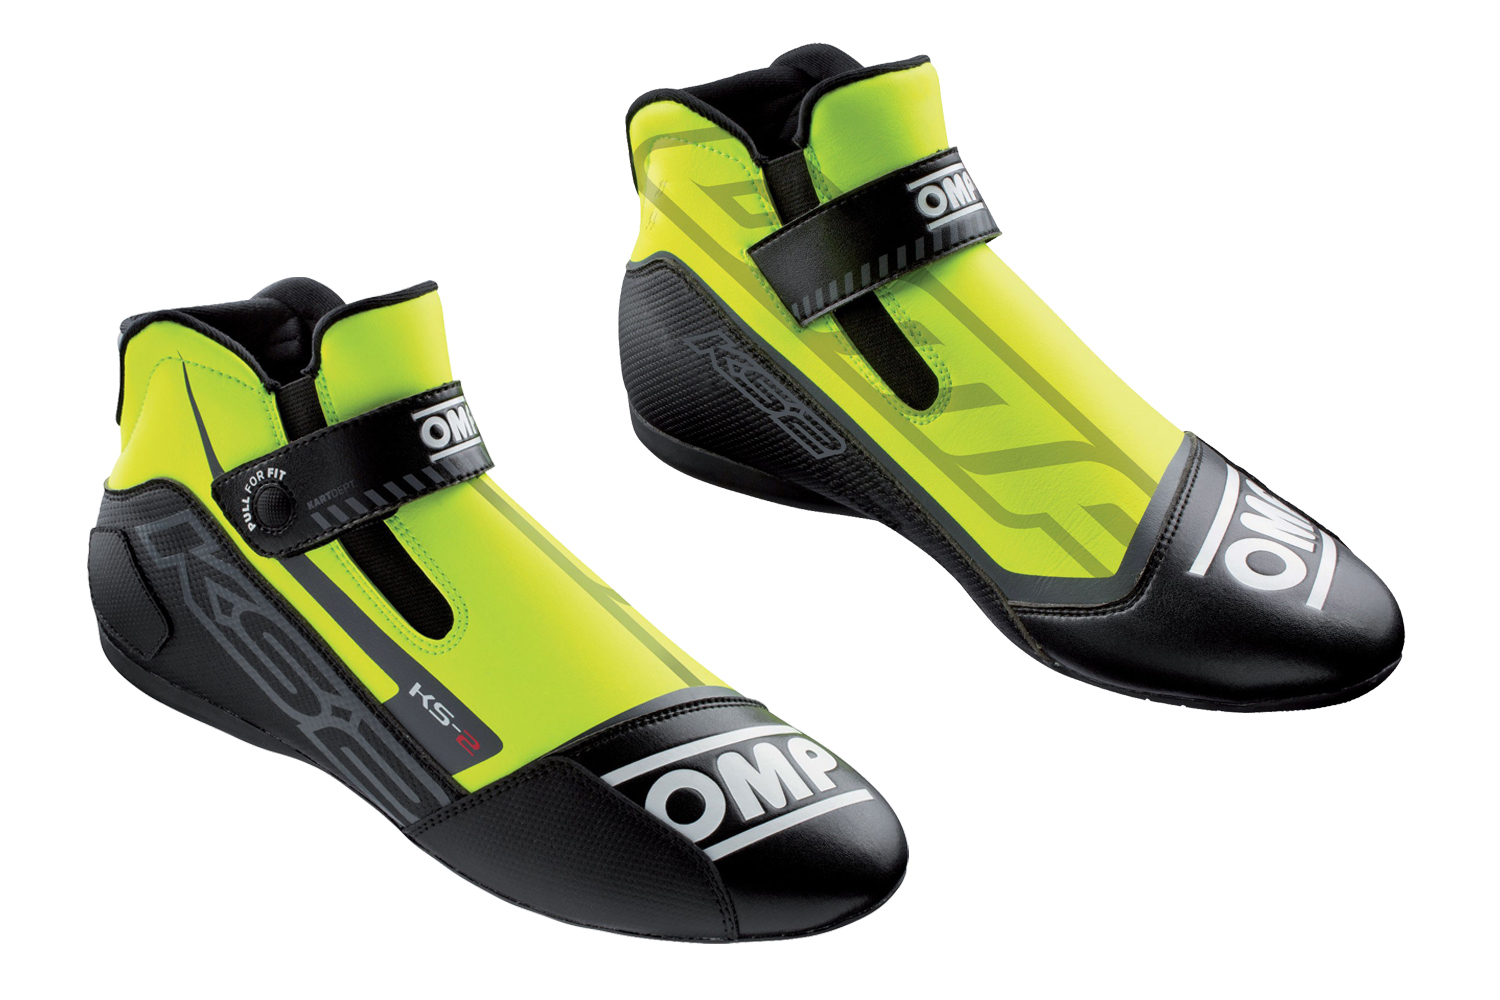 OMP Racing IC82505934 - Shoe, KS-2, Driving, Mid-Top, FIA Approved, Suede Leather Outer, Fire Retardant Fabric Inner, Fluorescent Yellow / Black, Euro Size 34, Pair